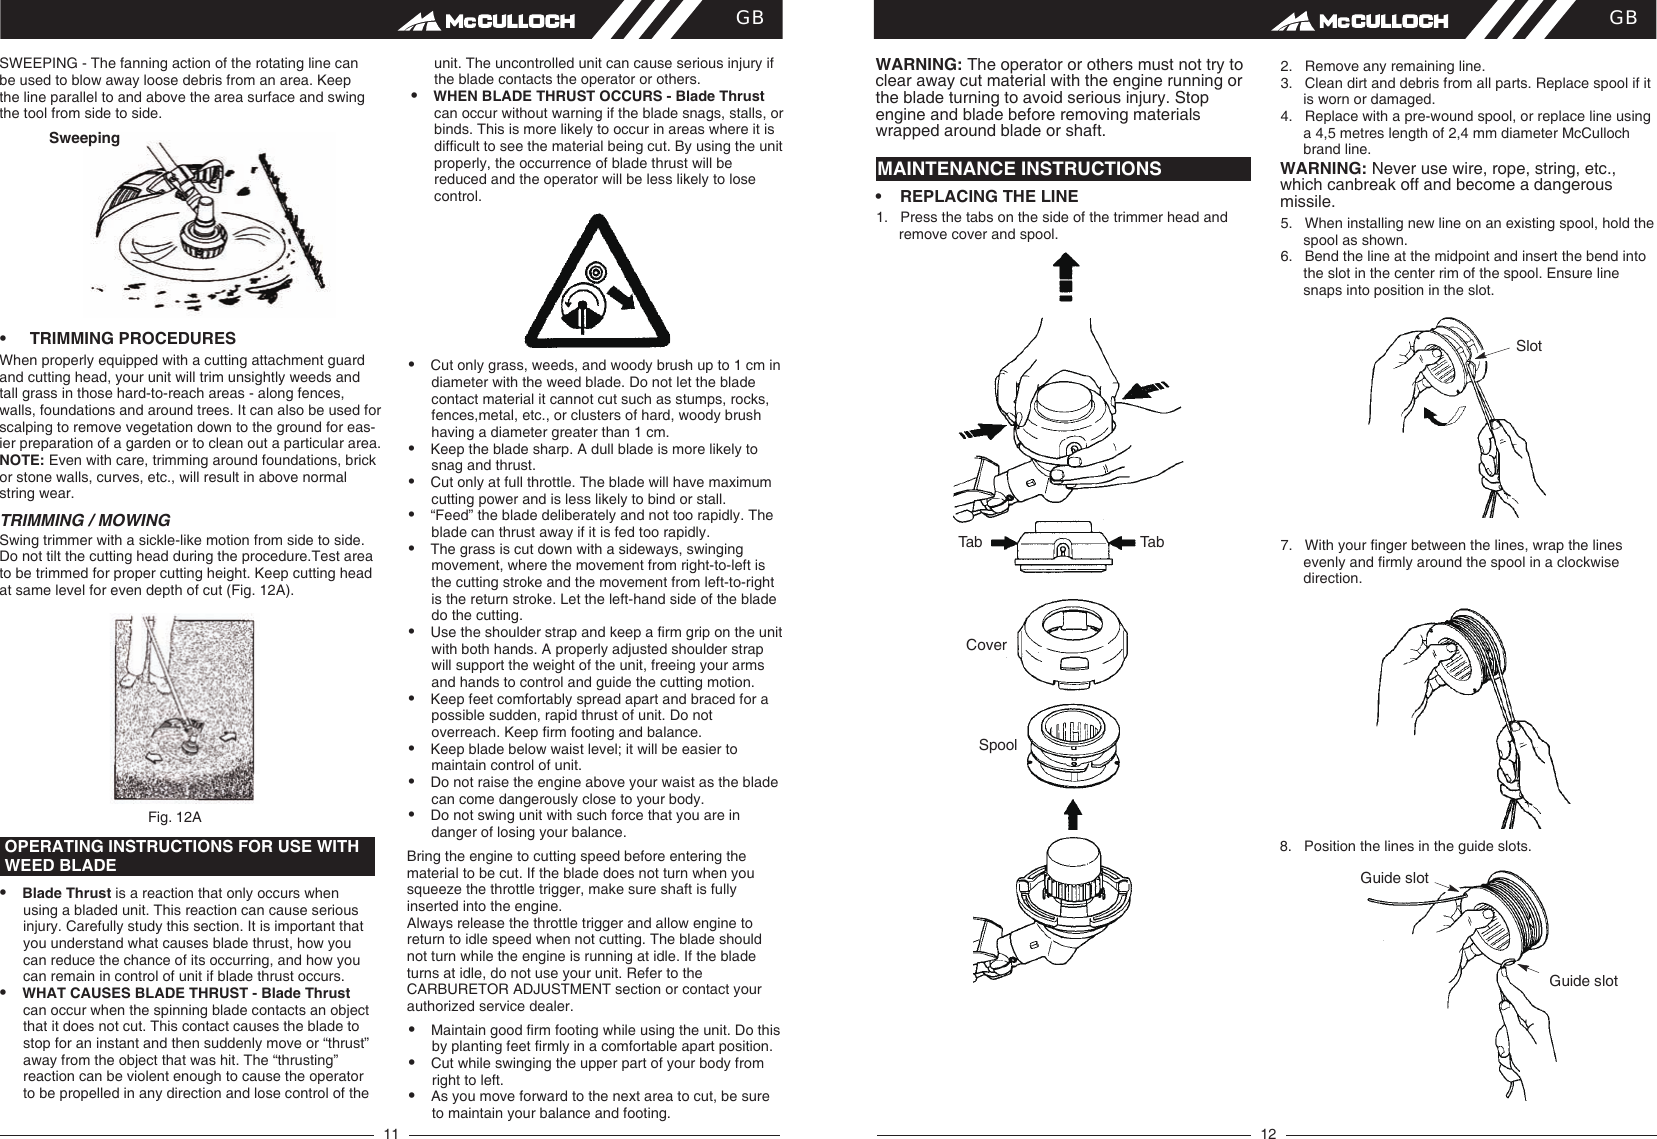 Page 7 of 9 - McCulloch MT 305 OM, McCulloch, CPS, MB CBS, 967153501, 967153502, 967153101, 966601201, 2012-12, Brushcutter User Manual  To The 1d81ec93-58ad-41d6-9294-243098001fde